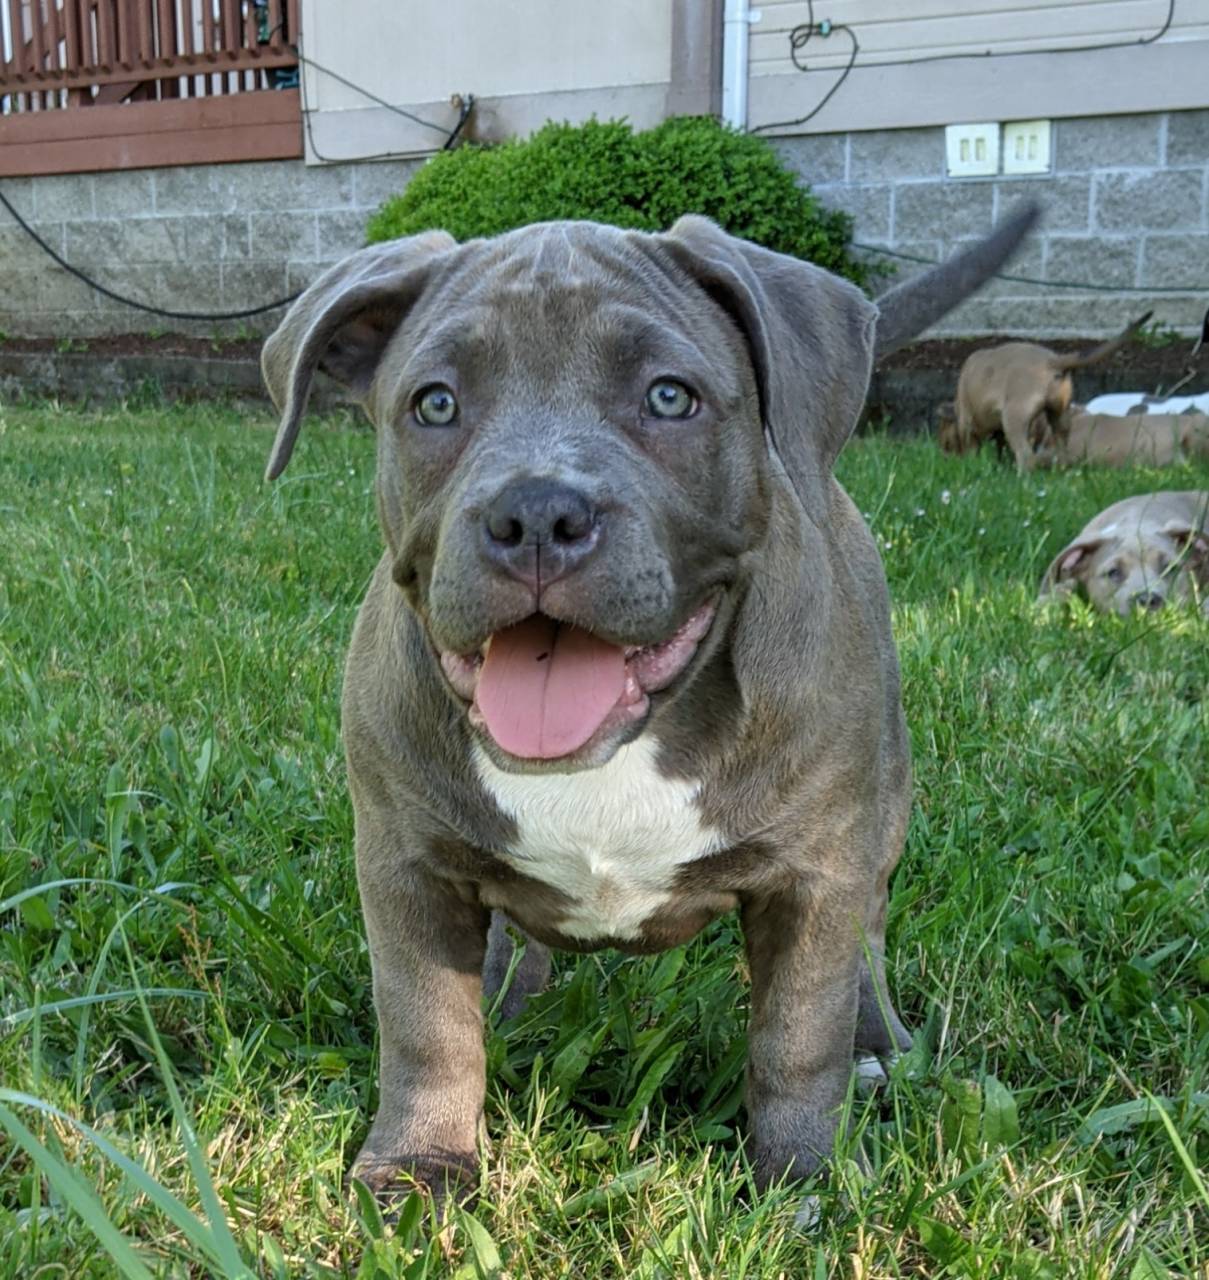 American bully named Baby